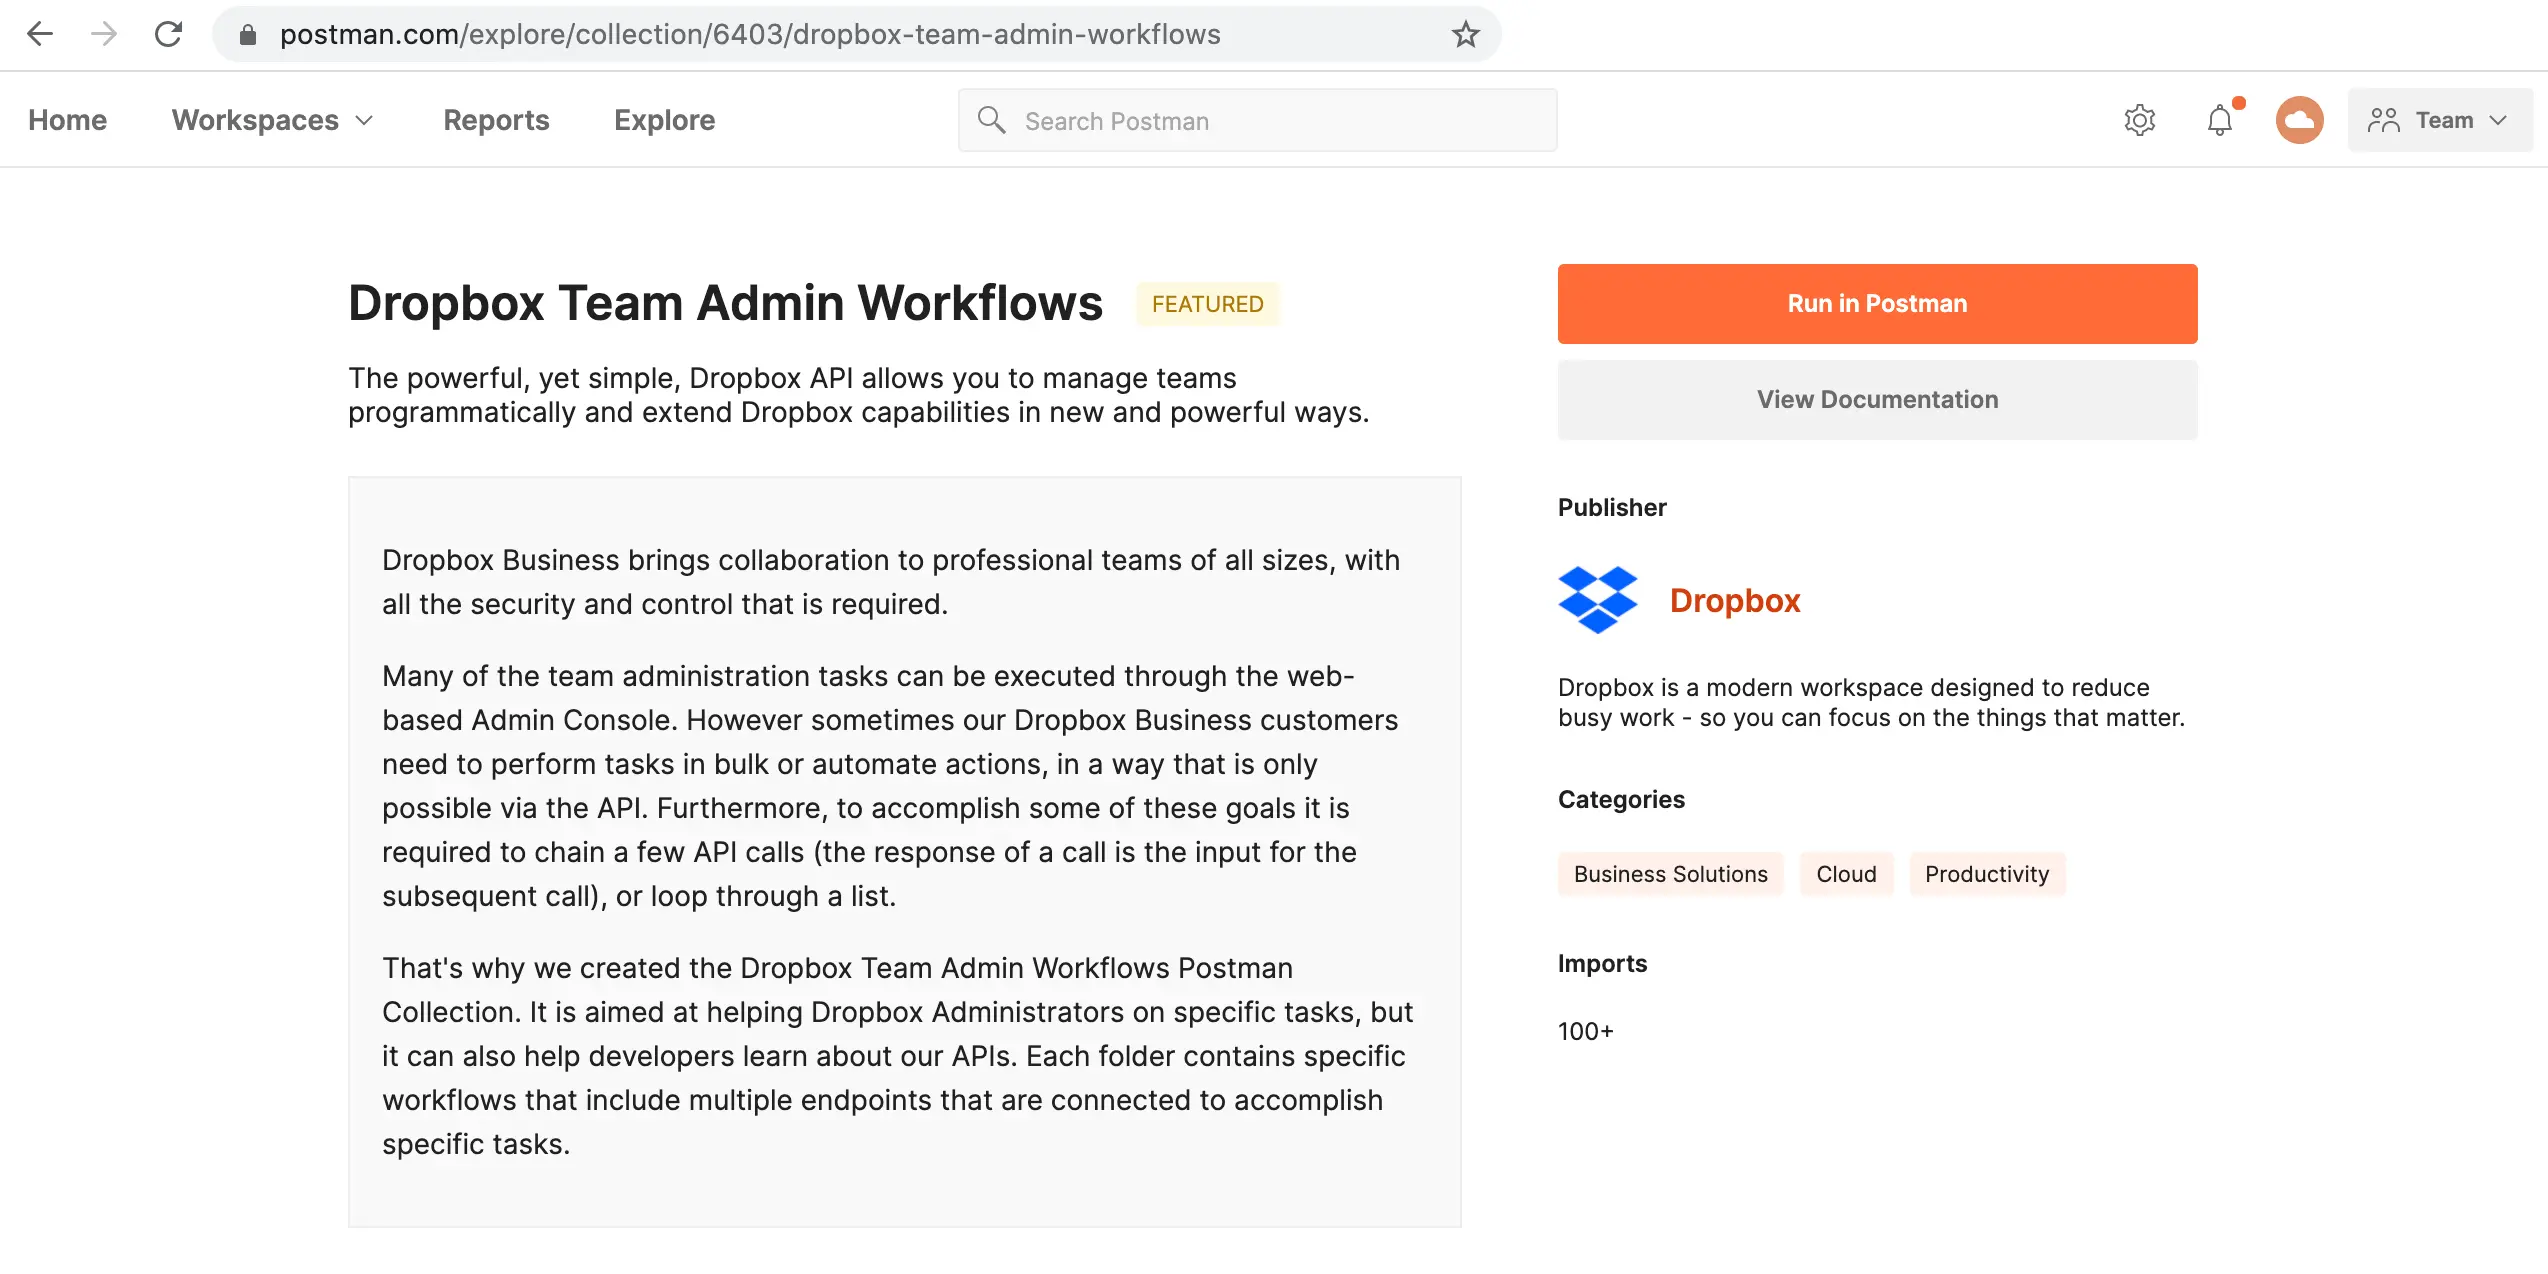 The Dropbox Team Admin Workflows collection in Postman